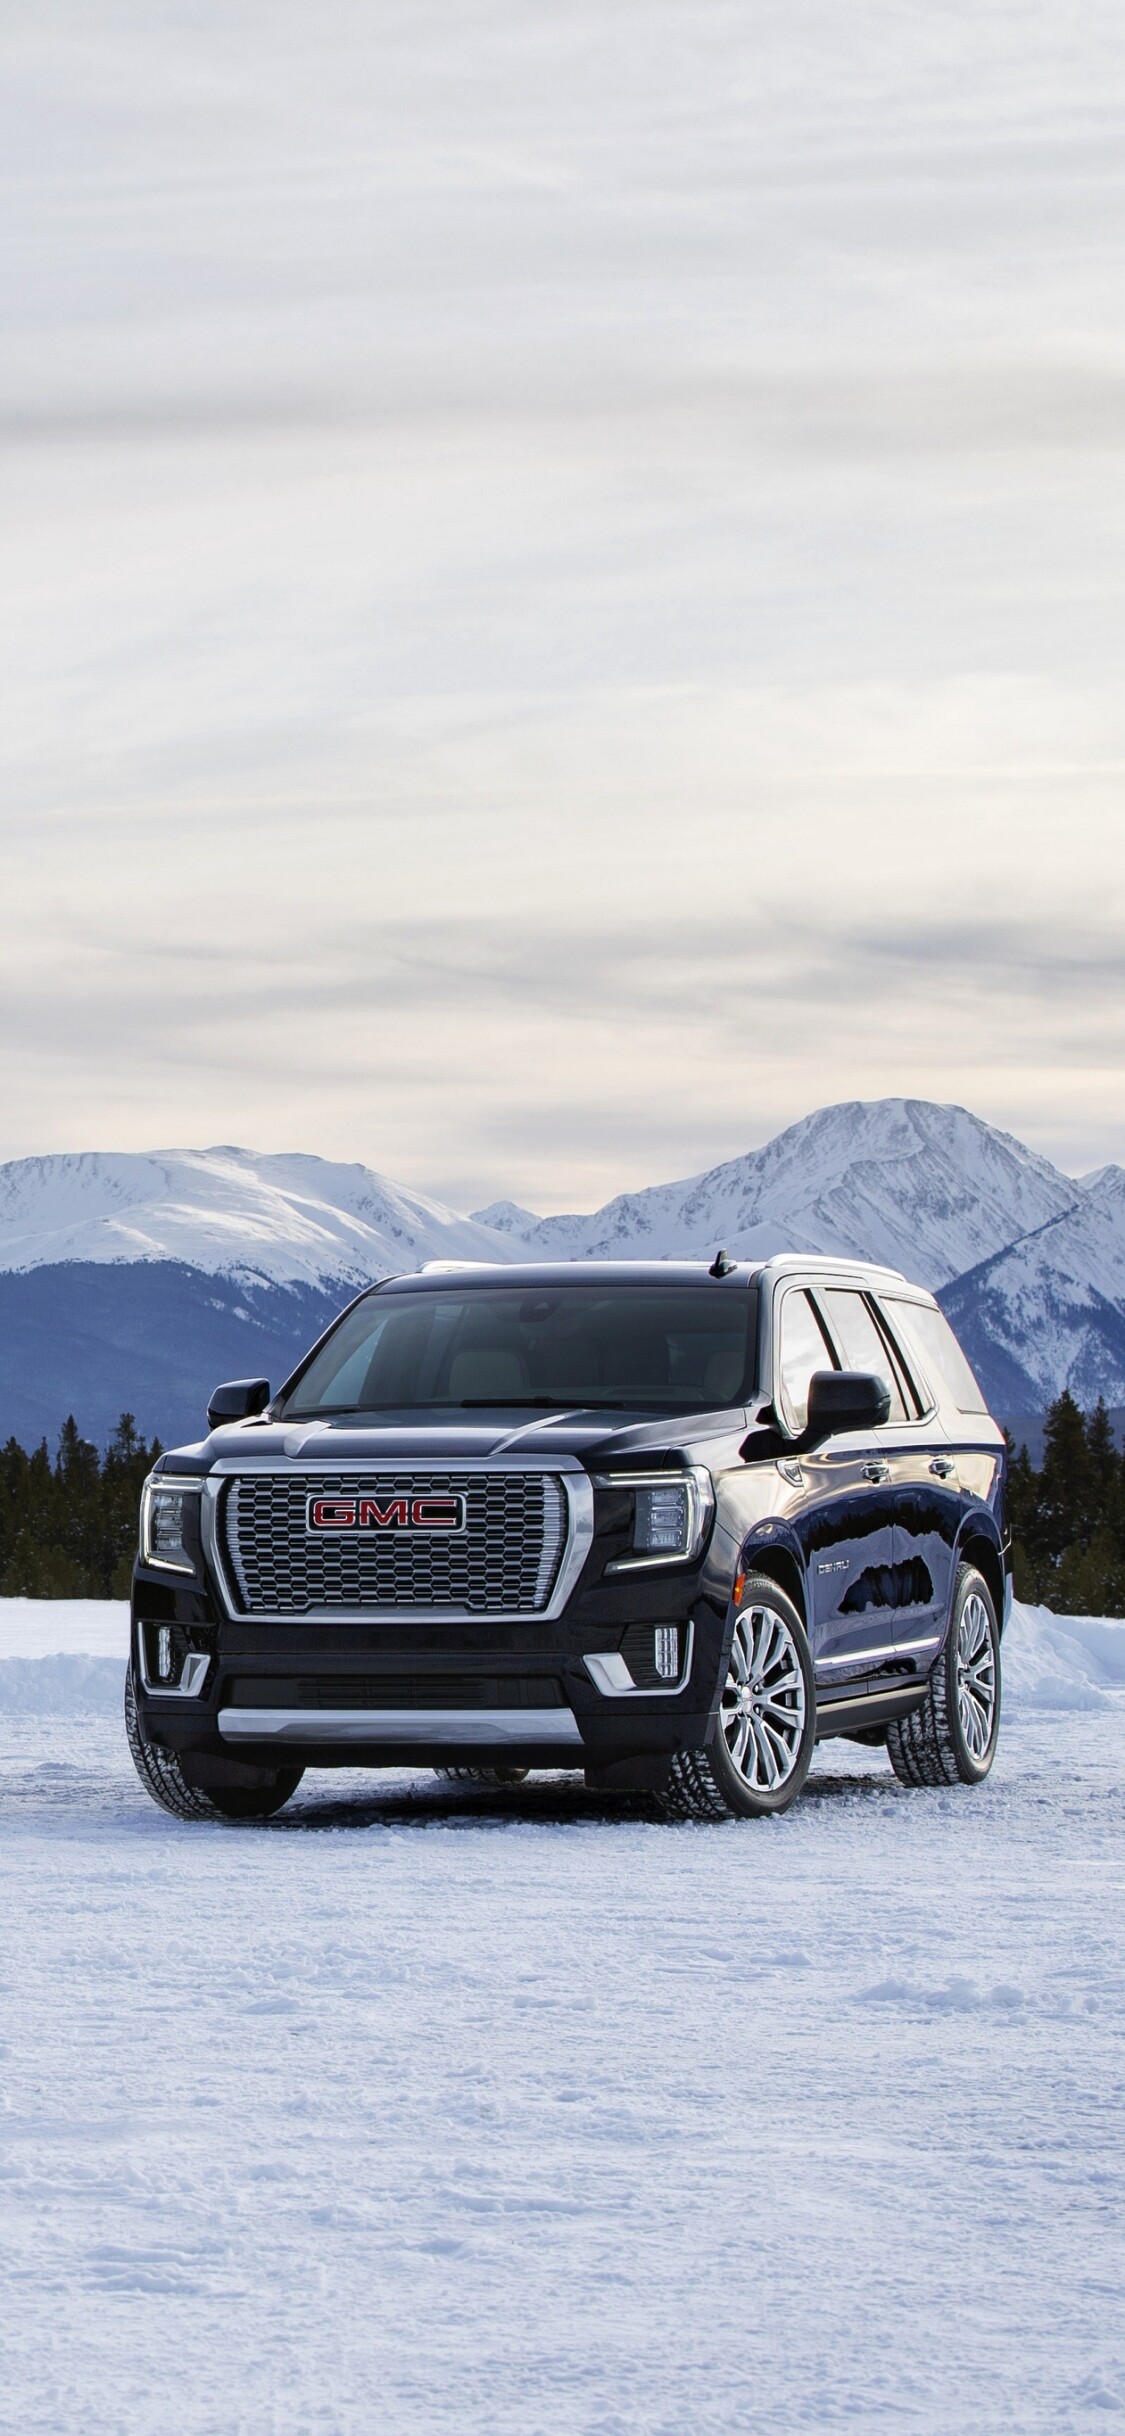 GMC: Vehicles GMC Yukon Denali, Designed for serious off-road action, Driving in the snow. 1130x2440 HD Wallpaper.